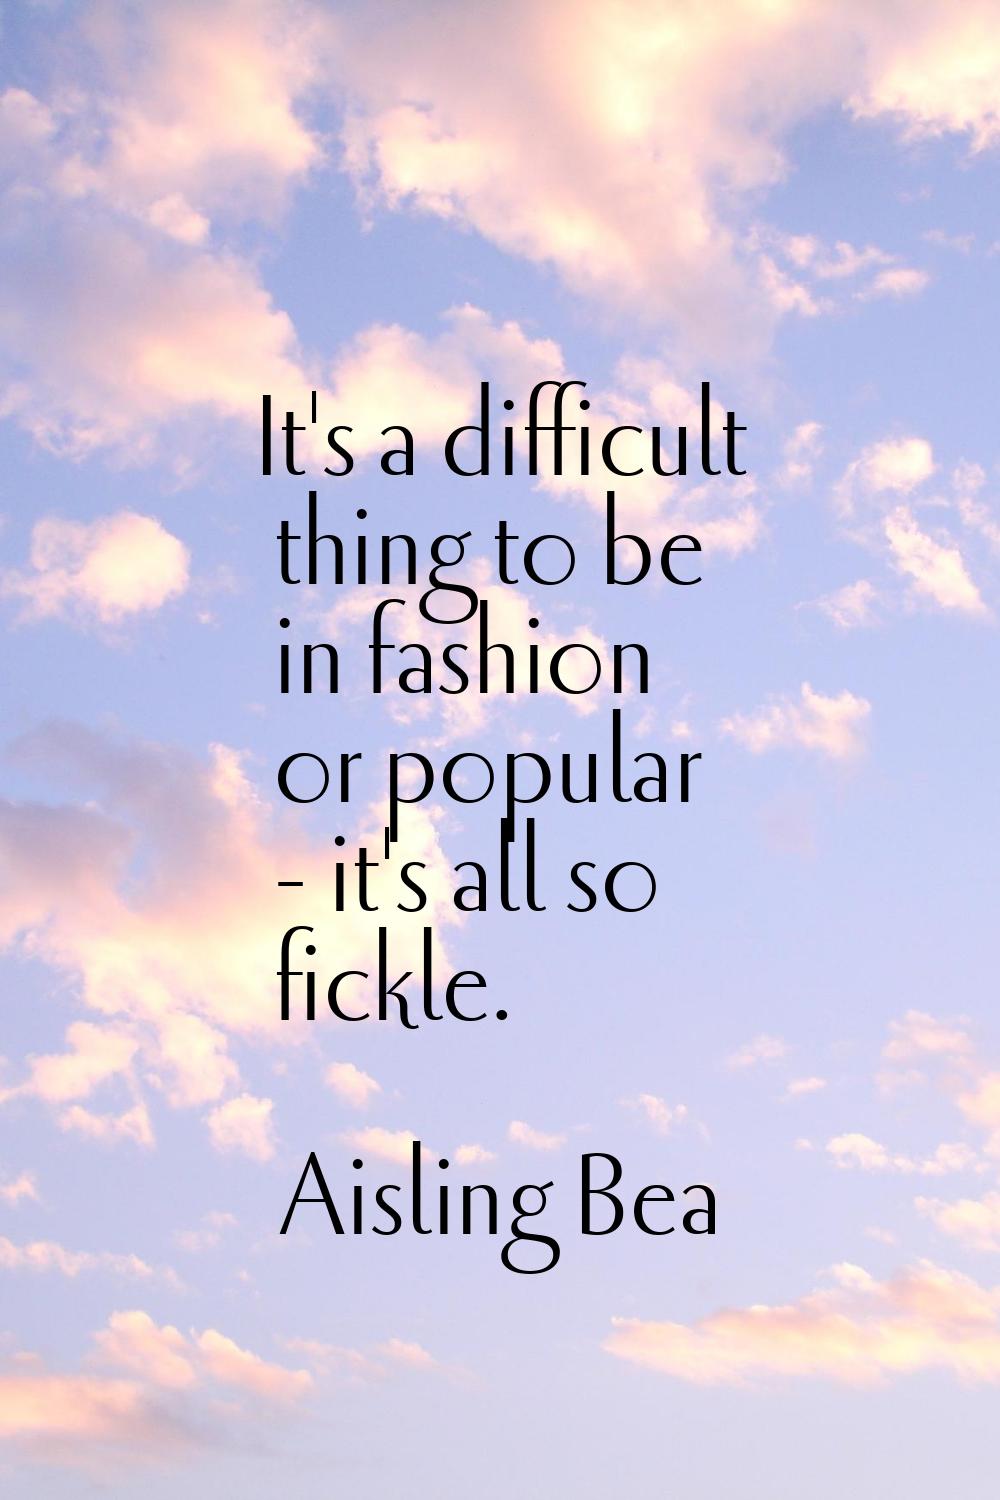 It's a difficult thing to be in fashion or popular - it's all so fickle.